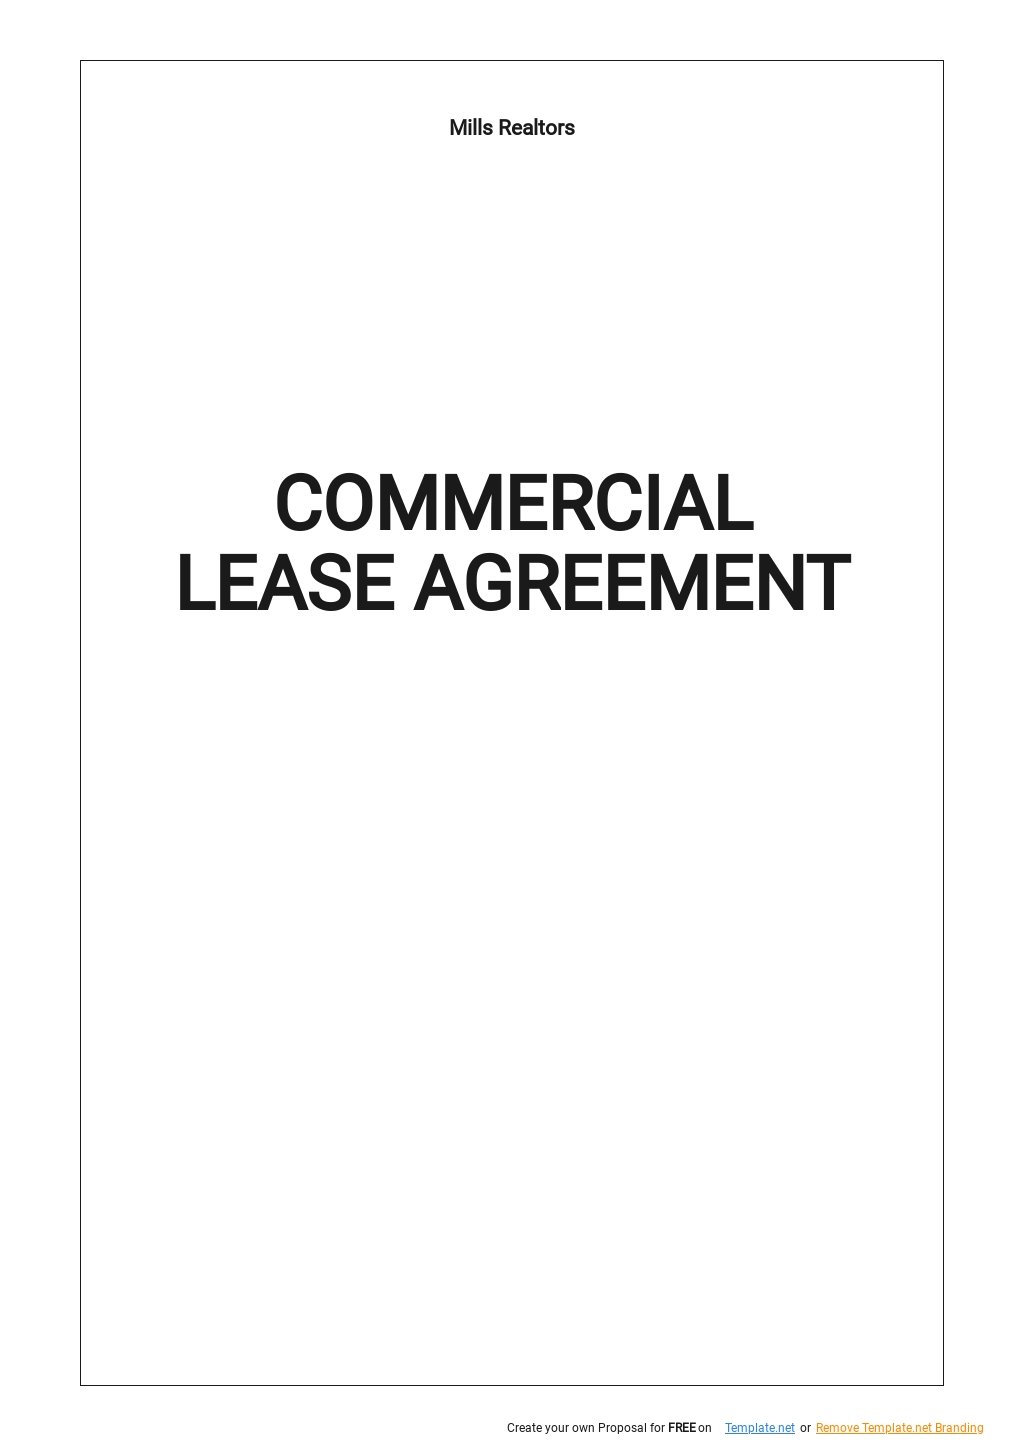 FREE Lease Agreement Templates in Microsoft Word (DOC)